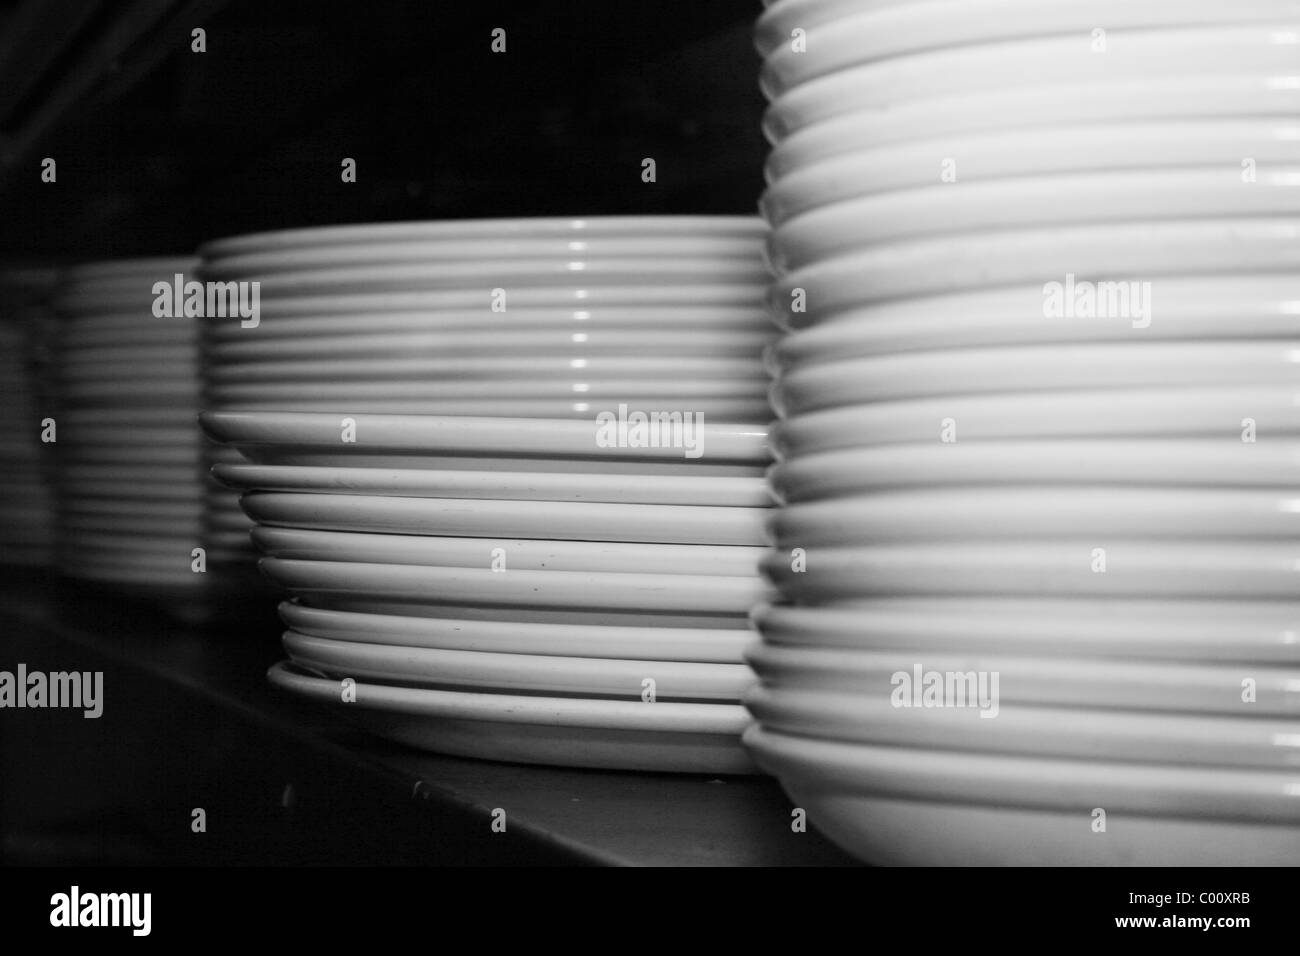 stacked plates on shelf in kitchen Stock Photo